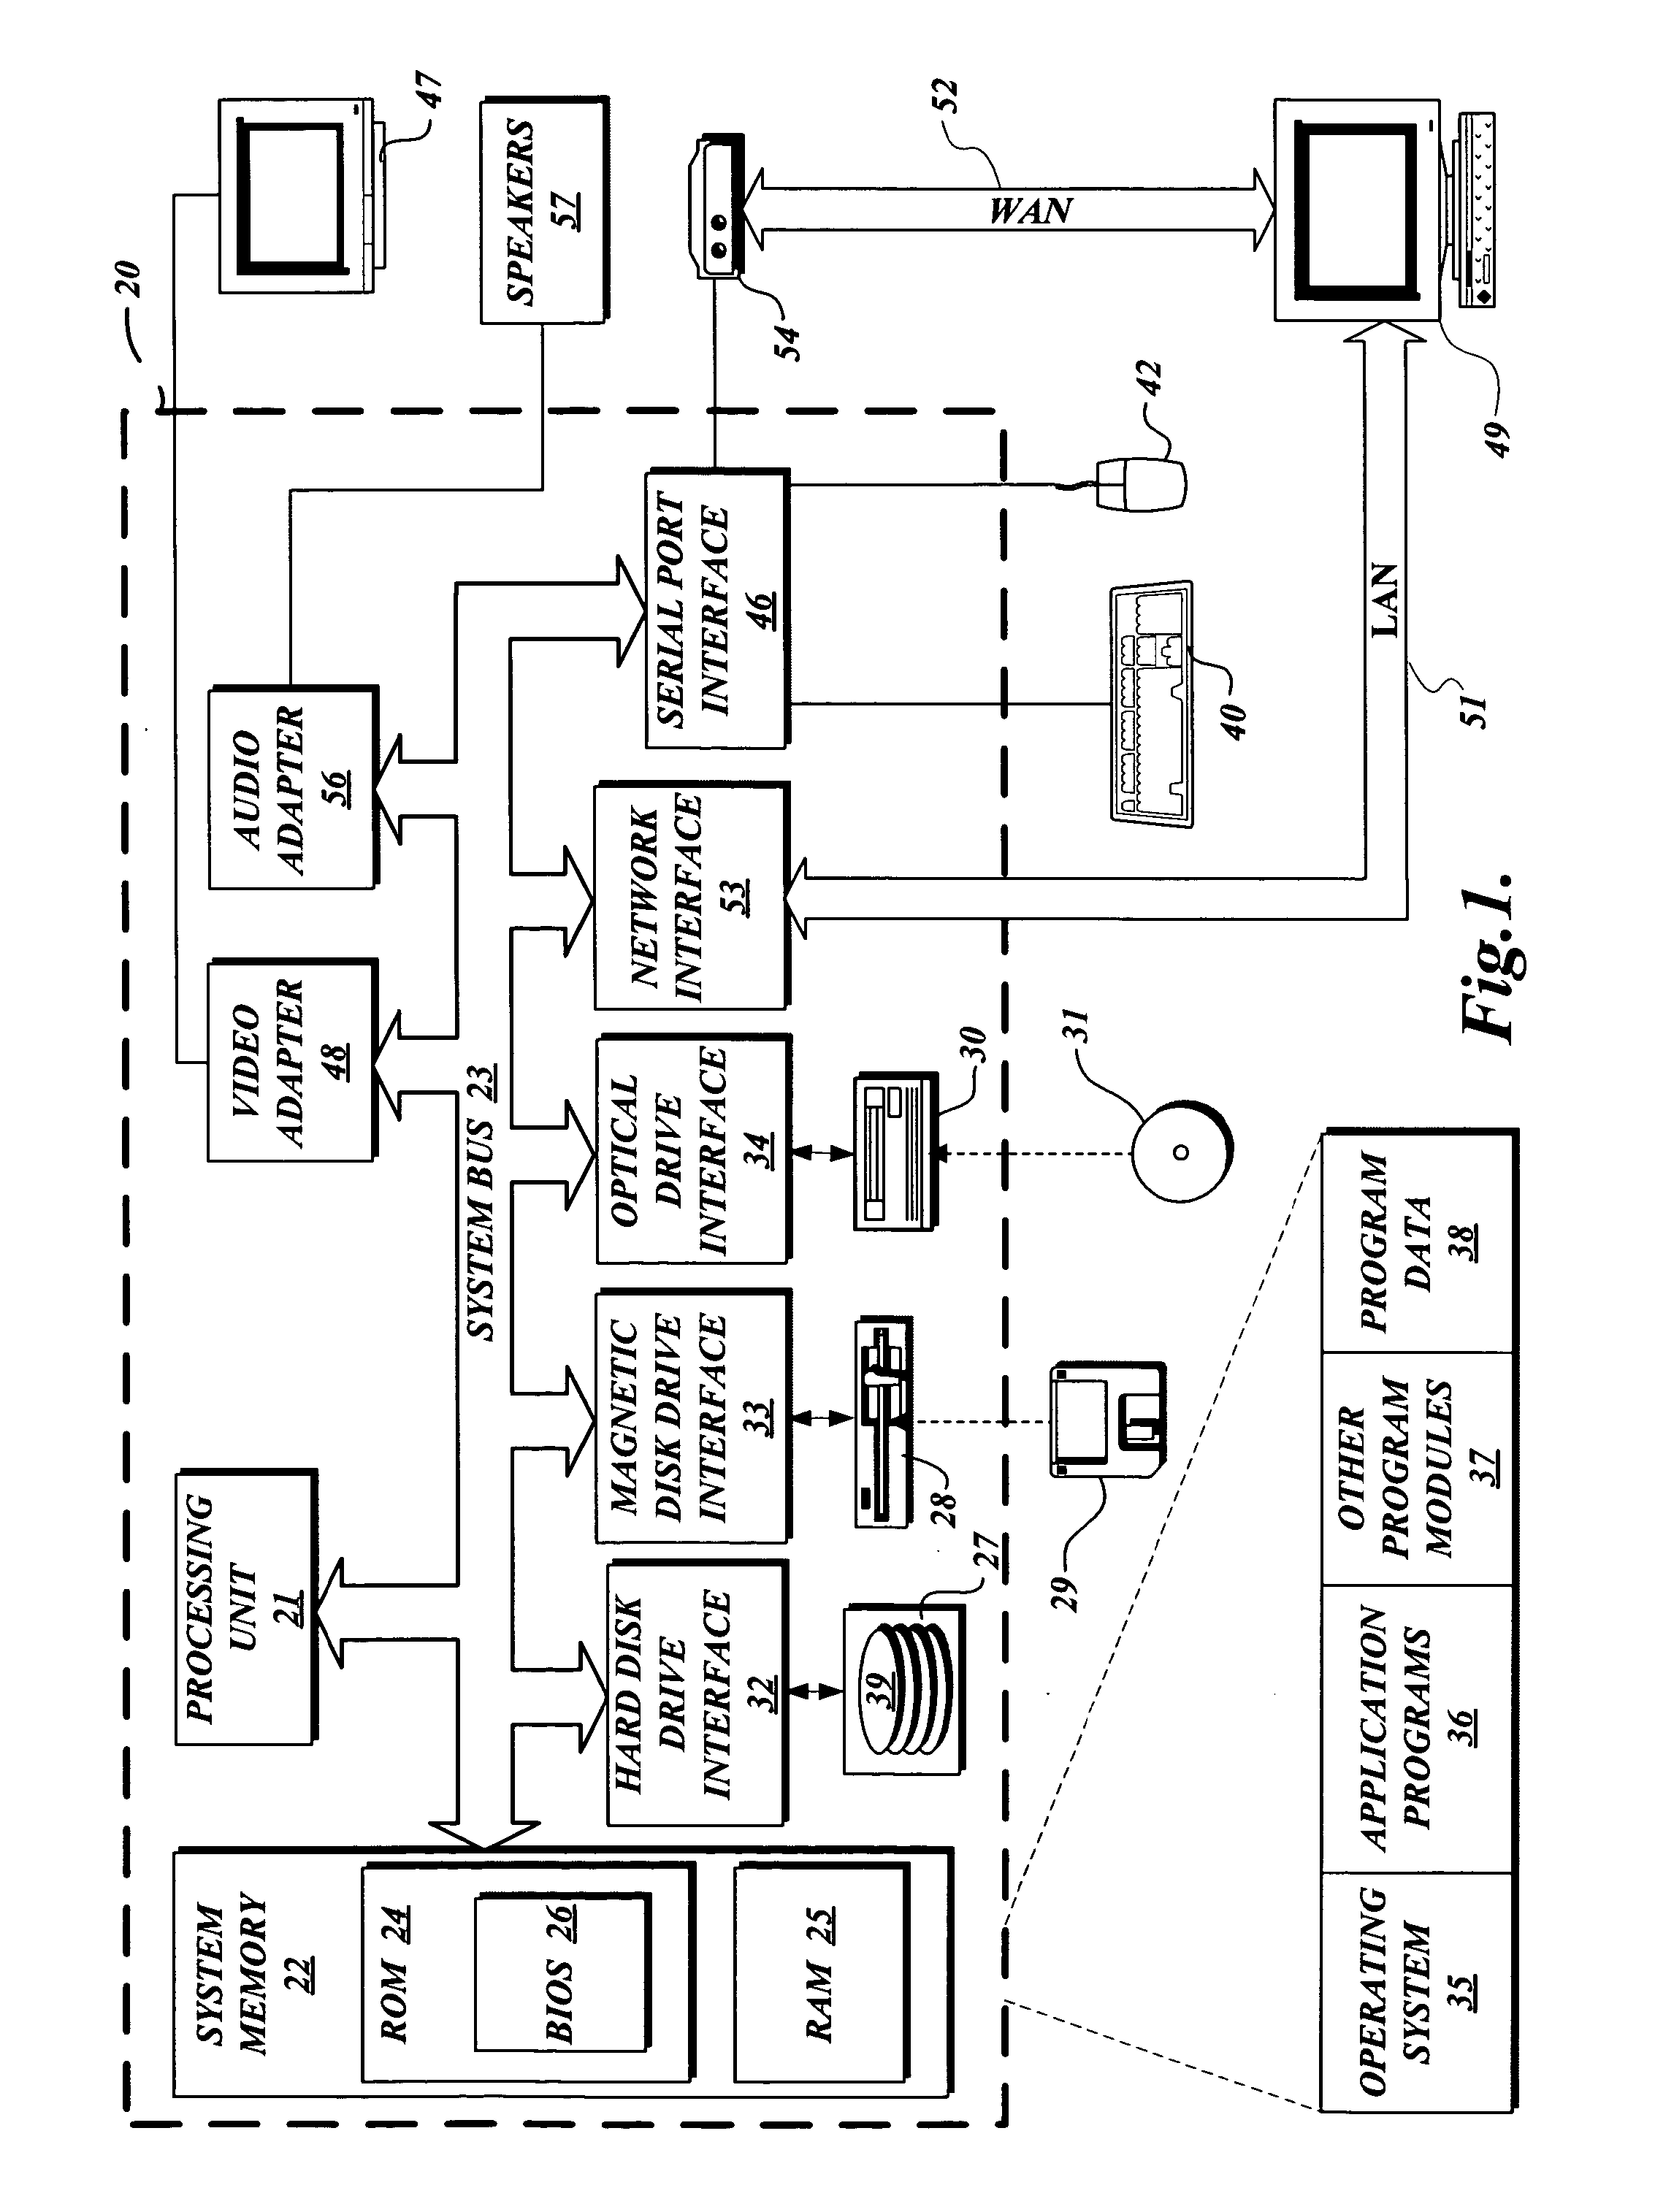 System and method for virtual folder sharing including utilization of static and dynamic lists